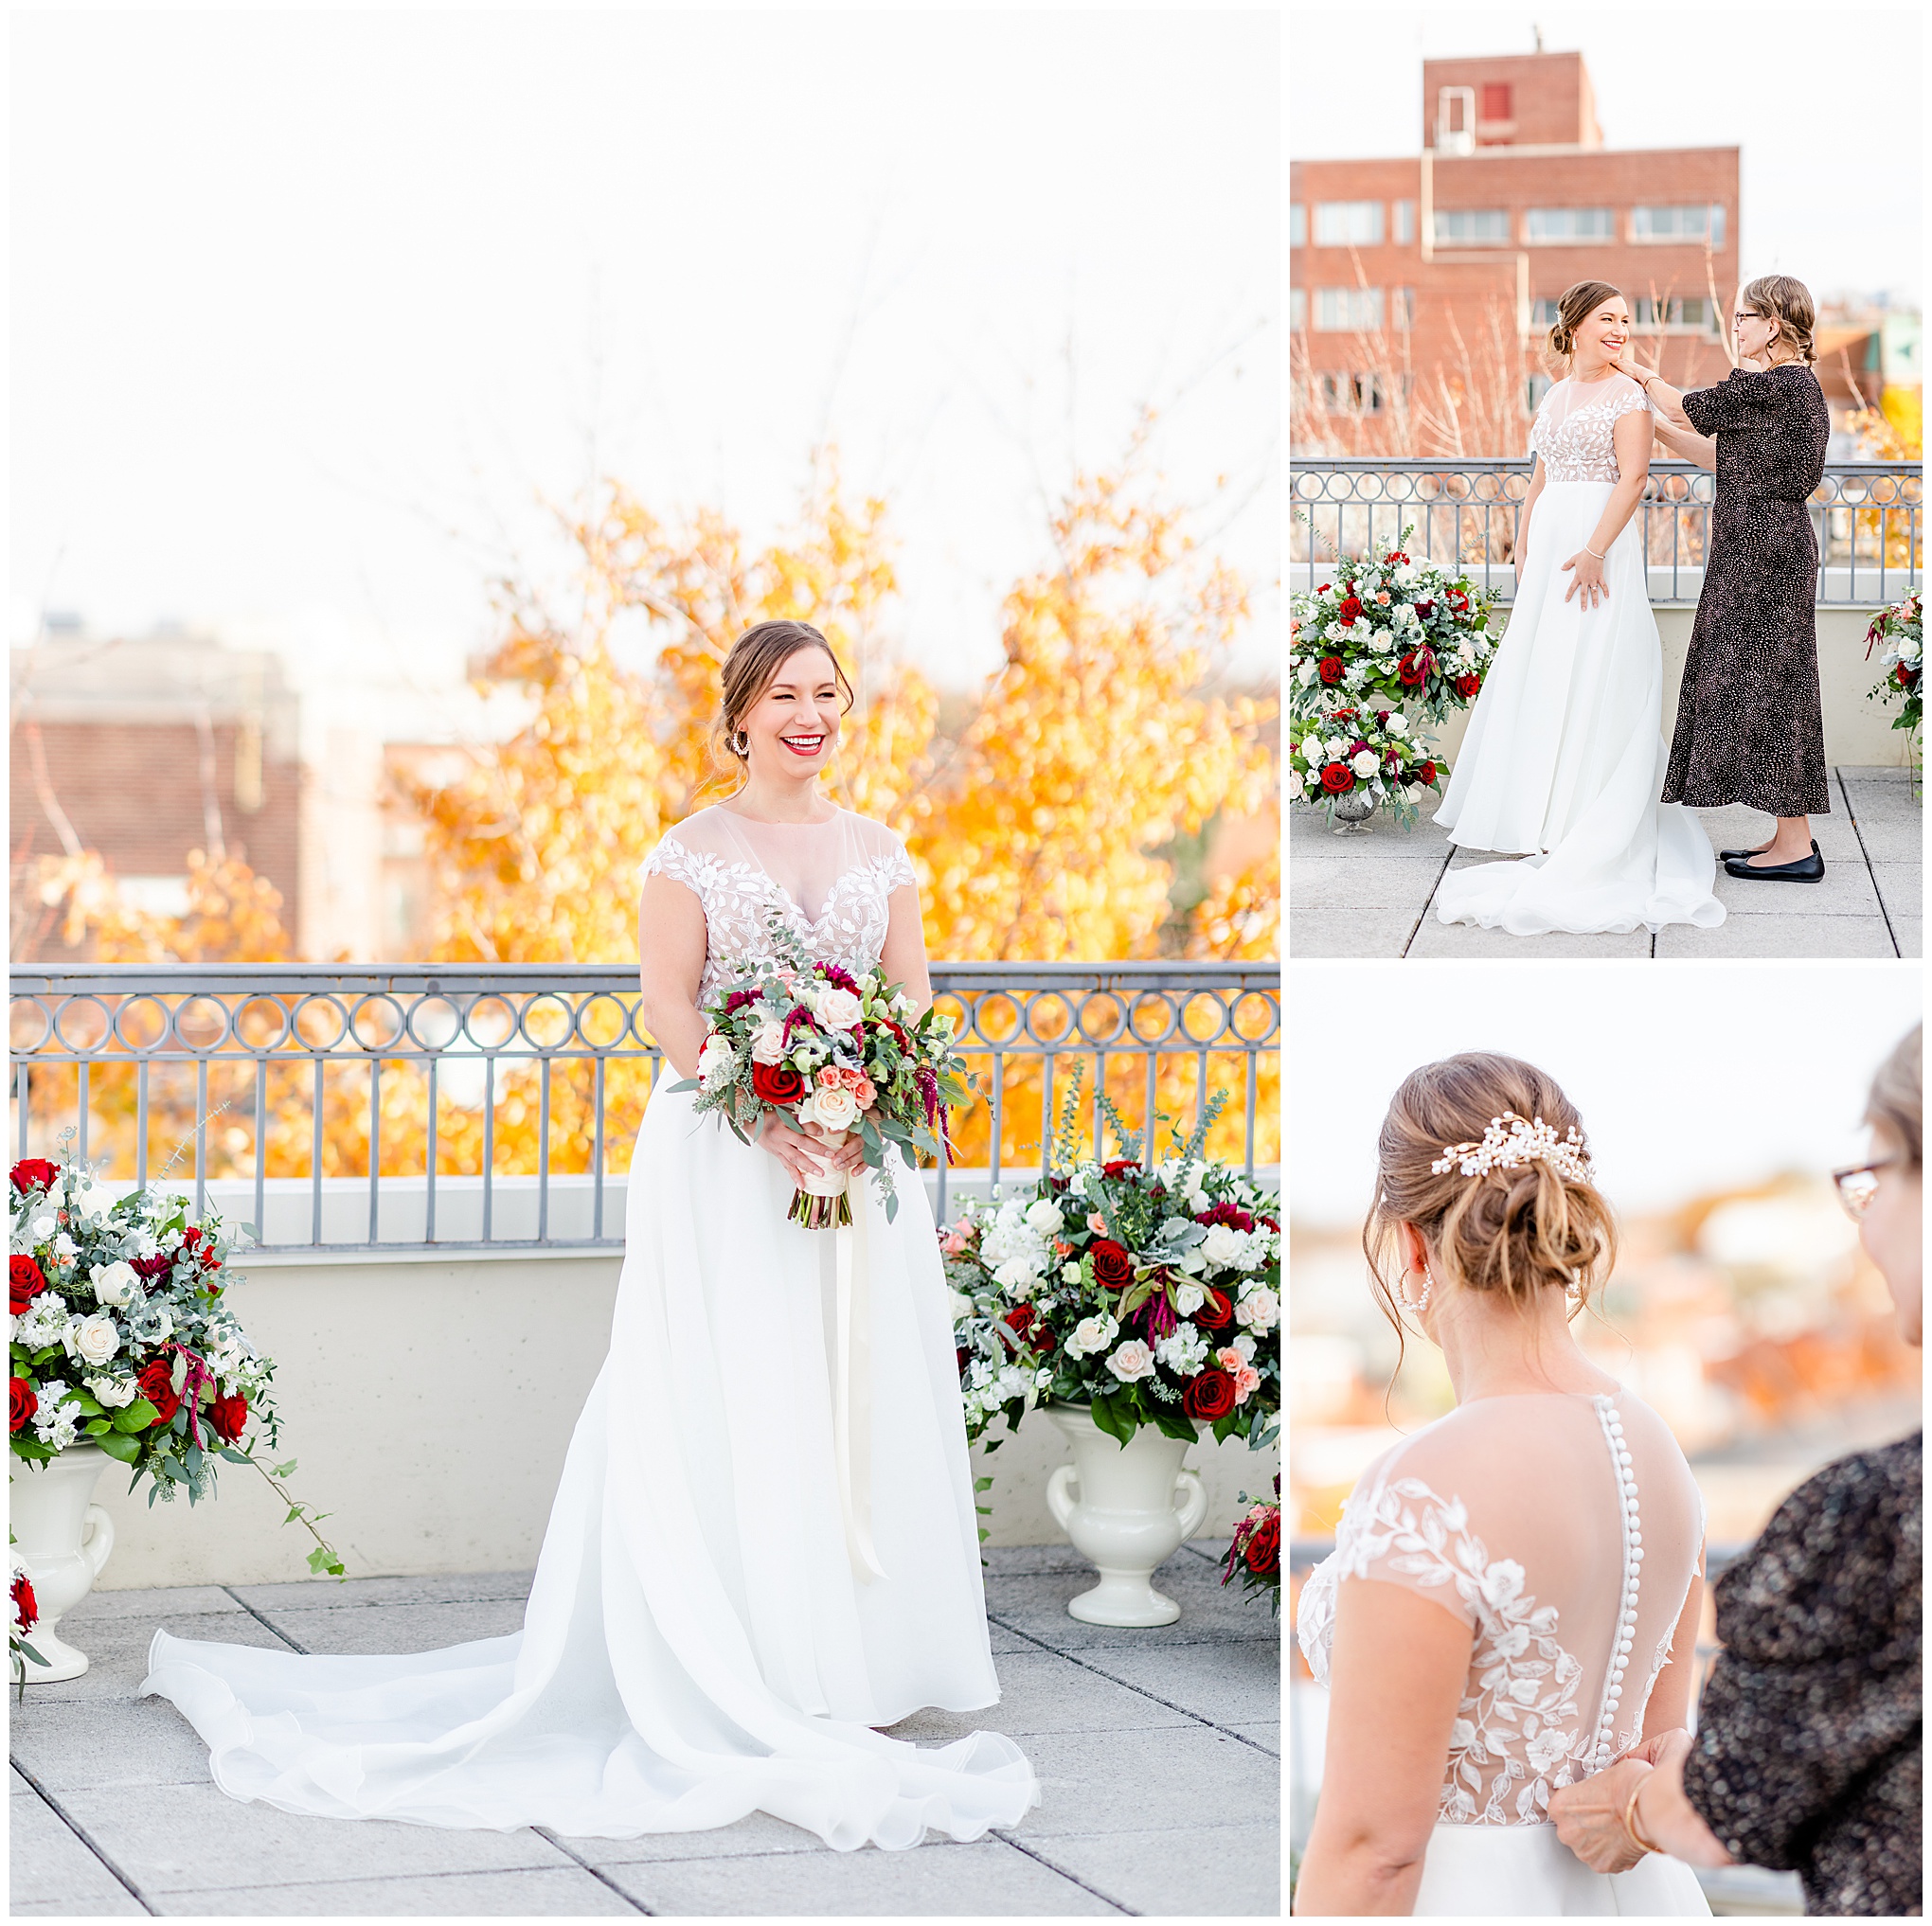 Lorien Alexandria winter wedding, Old Town Alexandria wedding, Alexandria Virginia wedding, DC micro wedding, northern Virginia wedding photographer, Alexandria Virginia wedding photographer, DC wedding photographer, winter wedding aesthetic, Rachel E.H. Photography, mother of bride helping bride, bride with bouquet on rooftop